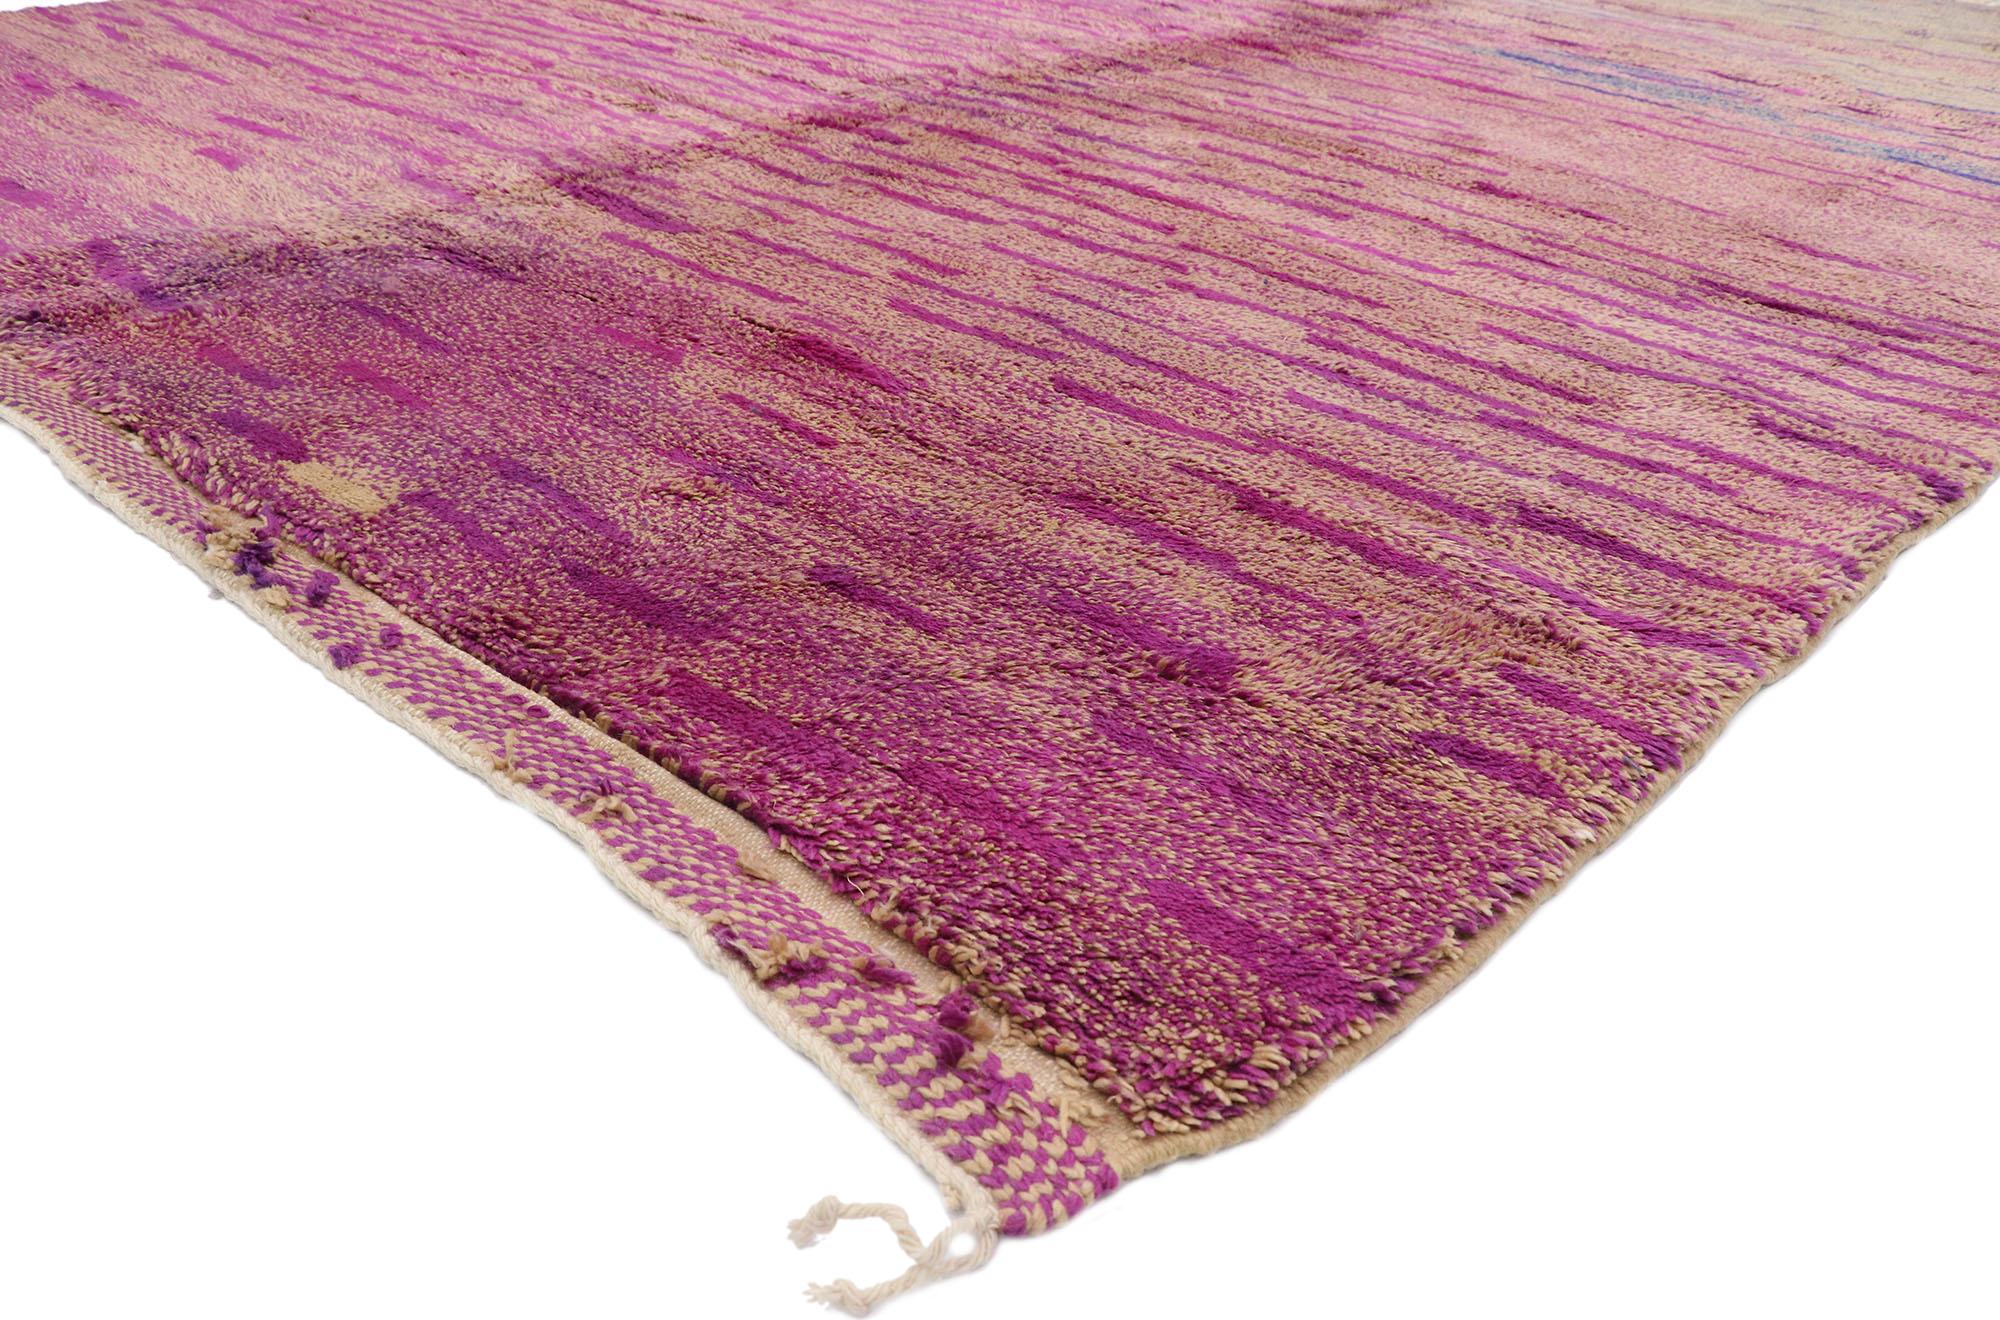 21120 Large Abstract Pink Moroccan Rug, 09'04 x 11'07.
Bohemian Rhapsody meets Abstract Expressionism in this hand knotted wool Berber Moroccan rug. The detailed expressionist design and vibrant pastel colors woven into this piece work together